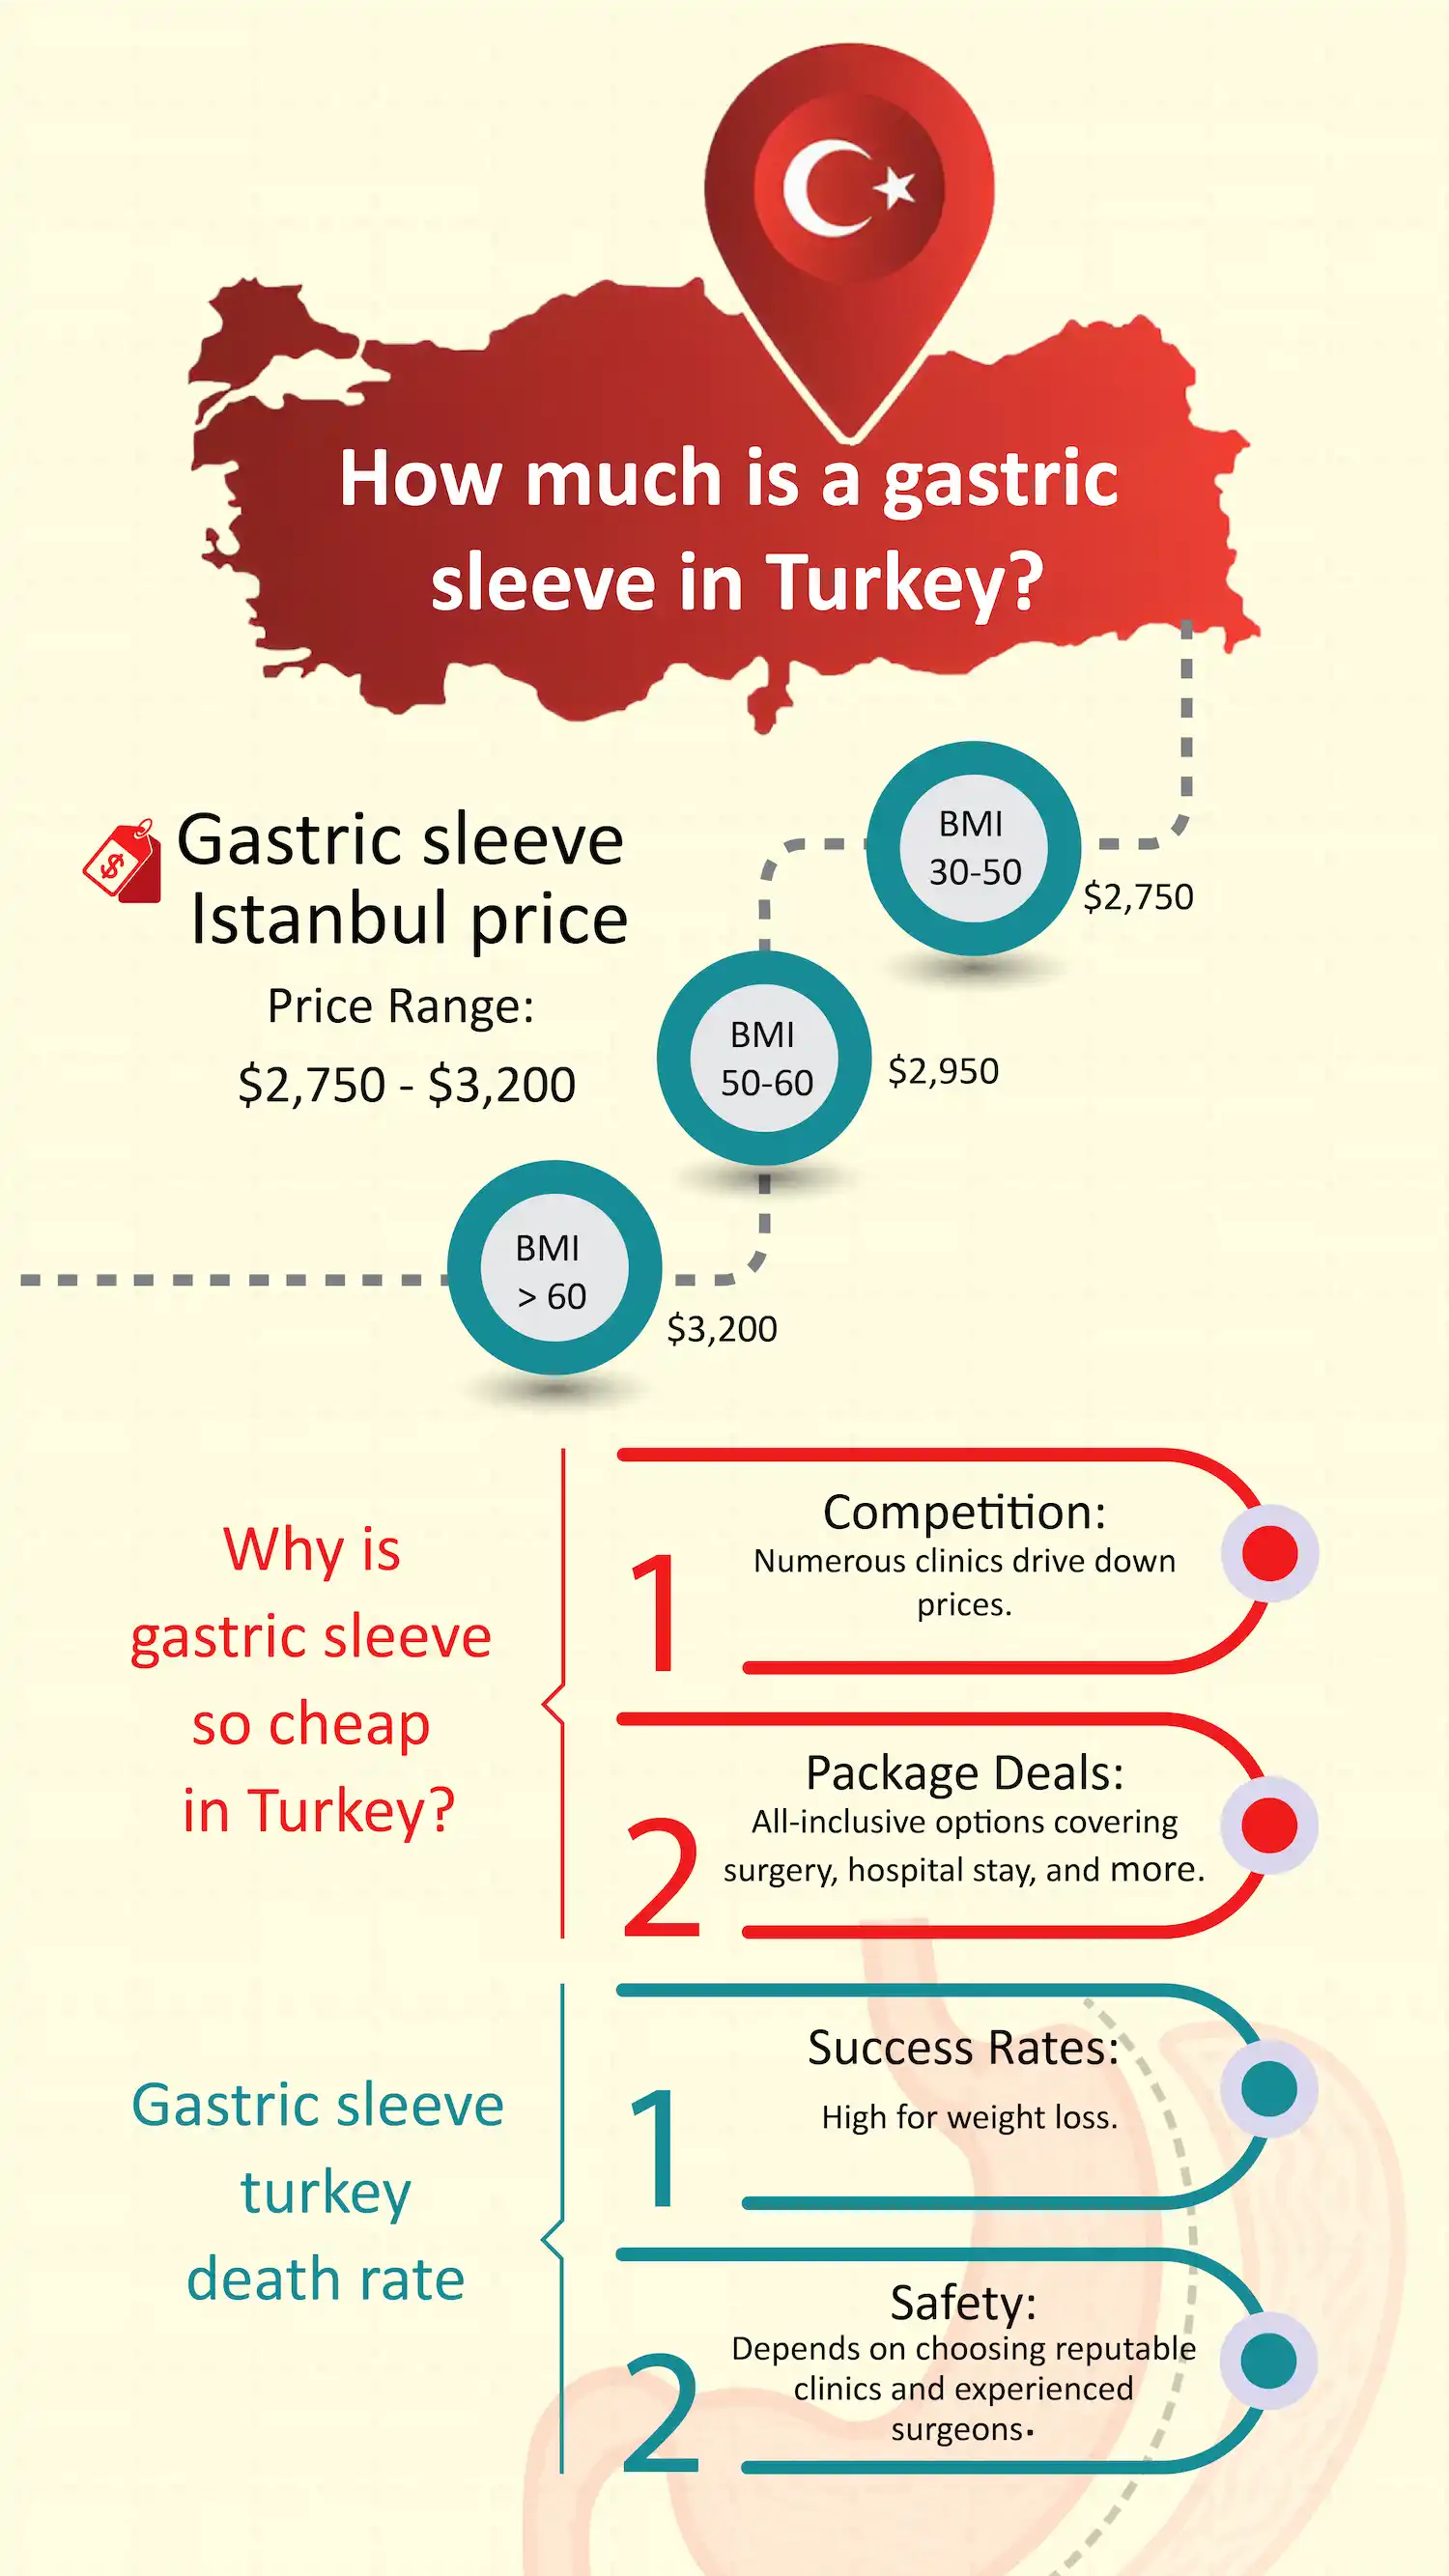 How much is gastric sleeve surgery in turkey?